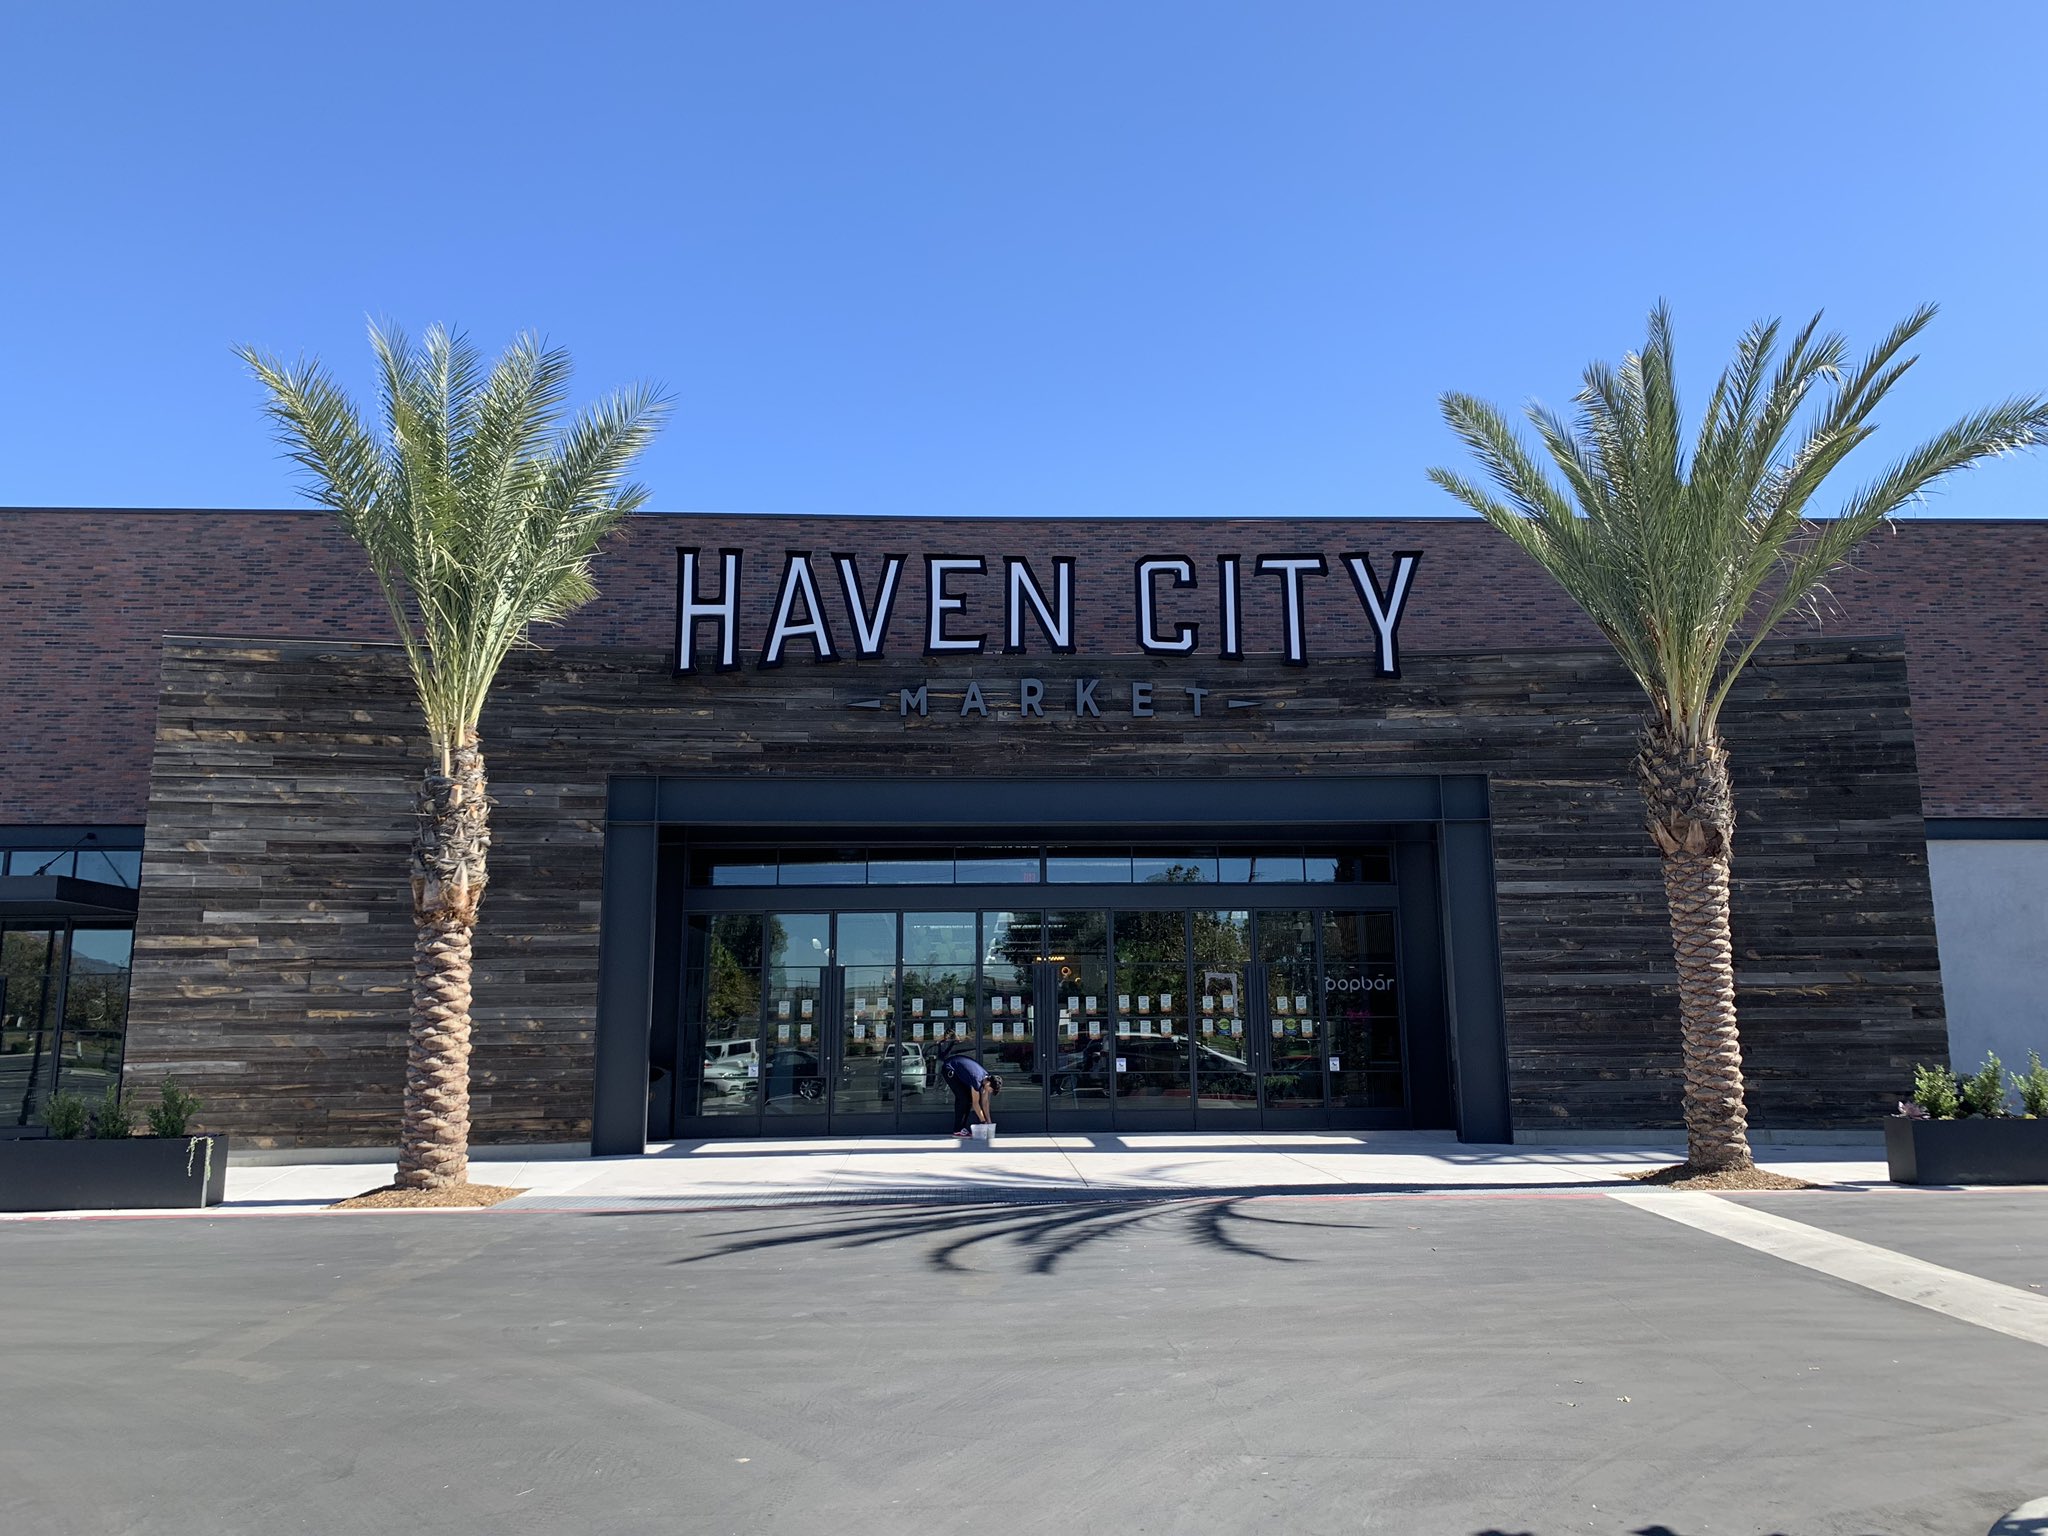 Entrance to the Haven City Market